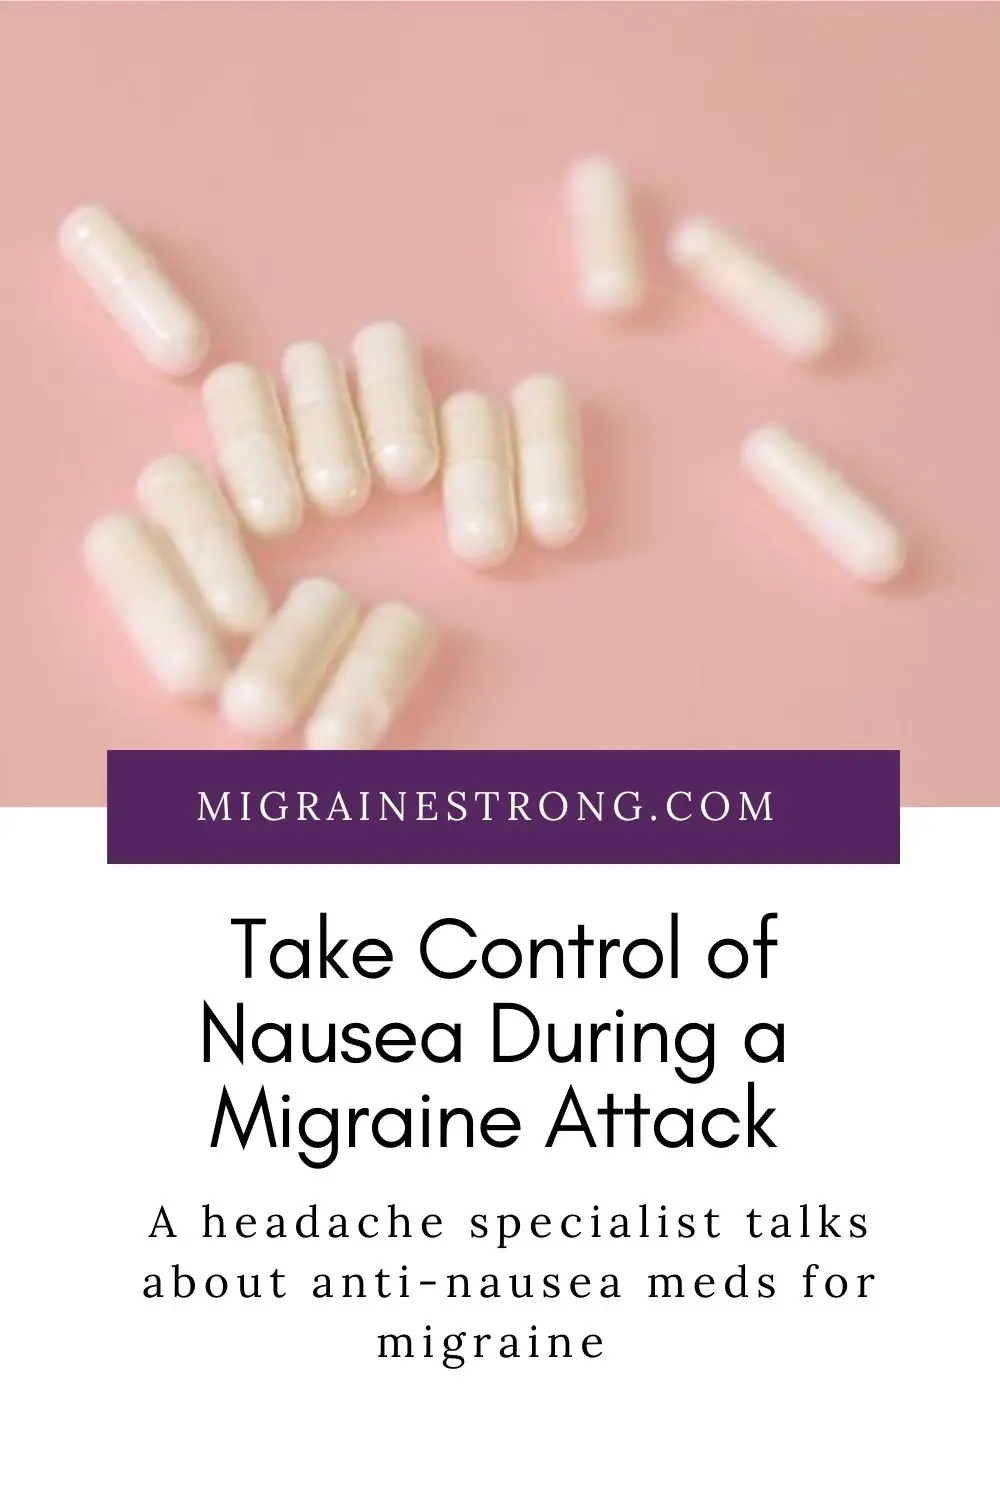 How To Take Control Of Nausea During A Migraine Attack